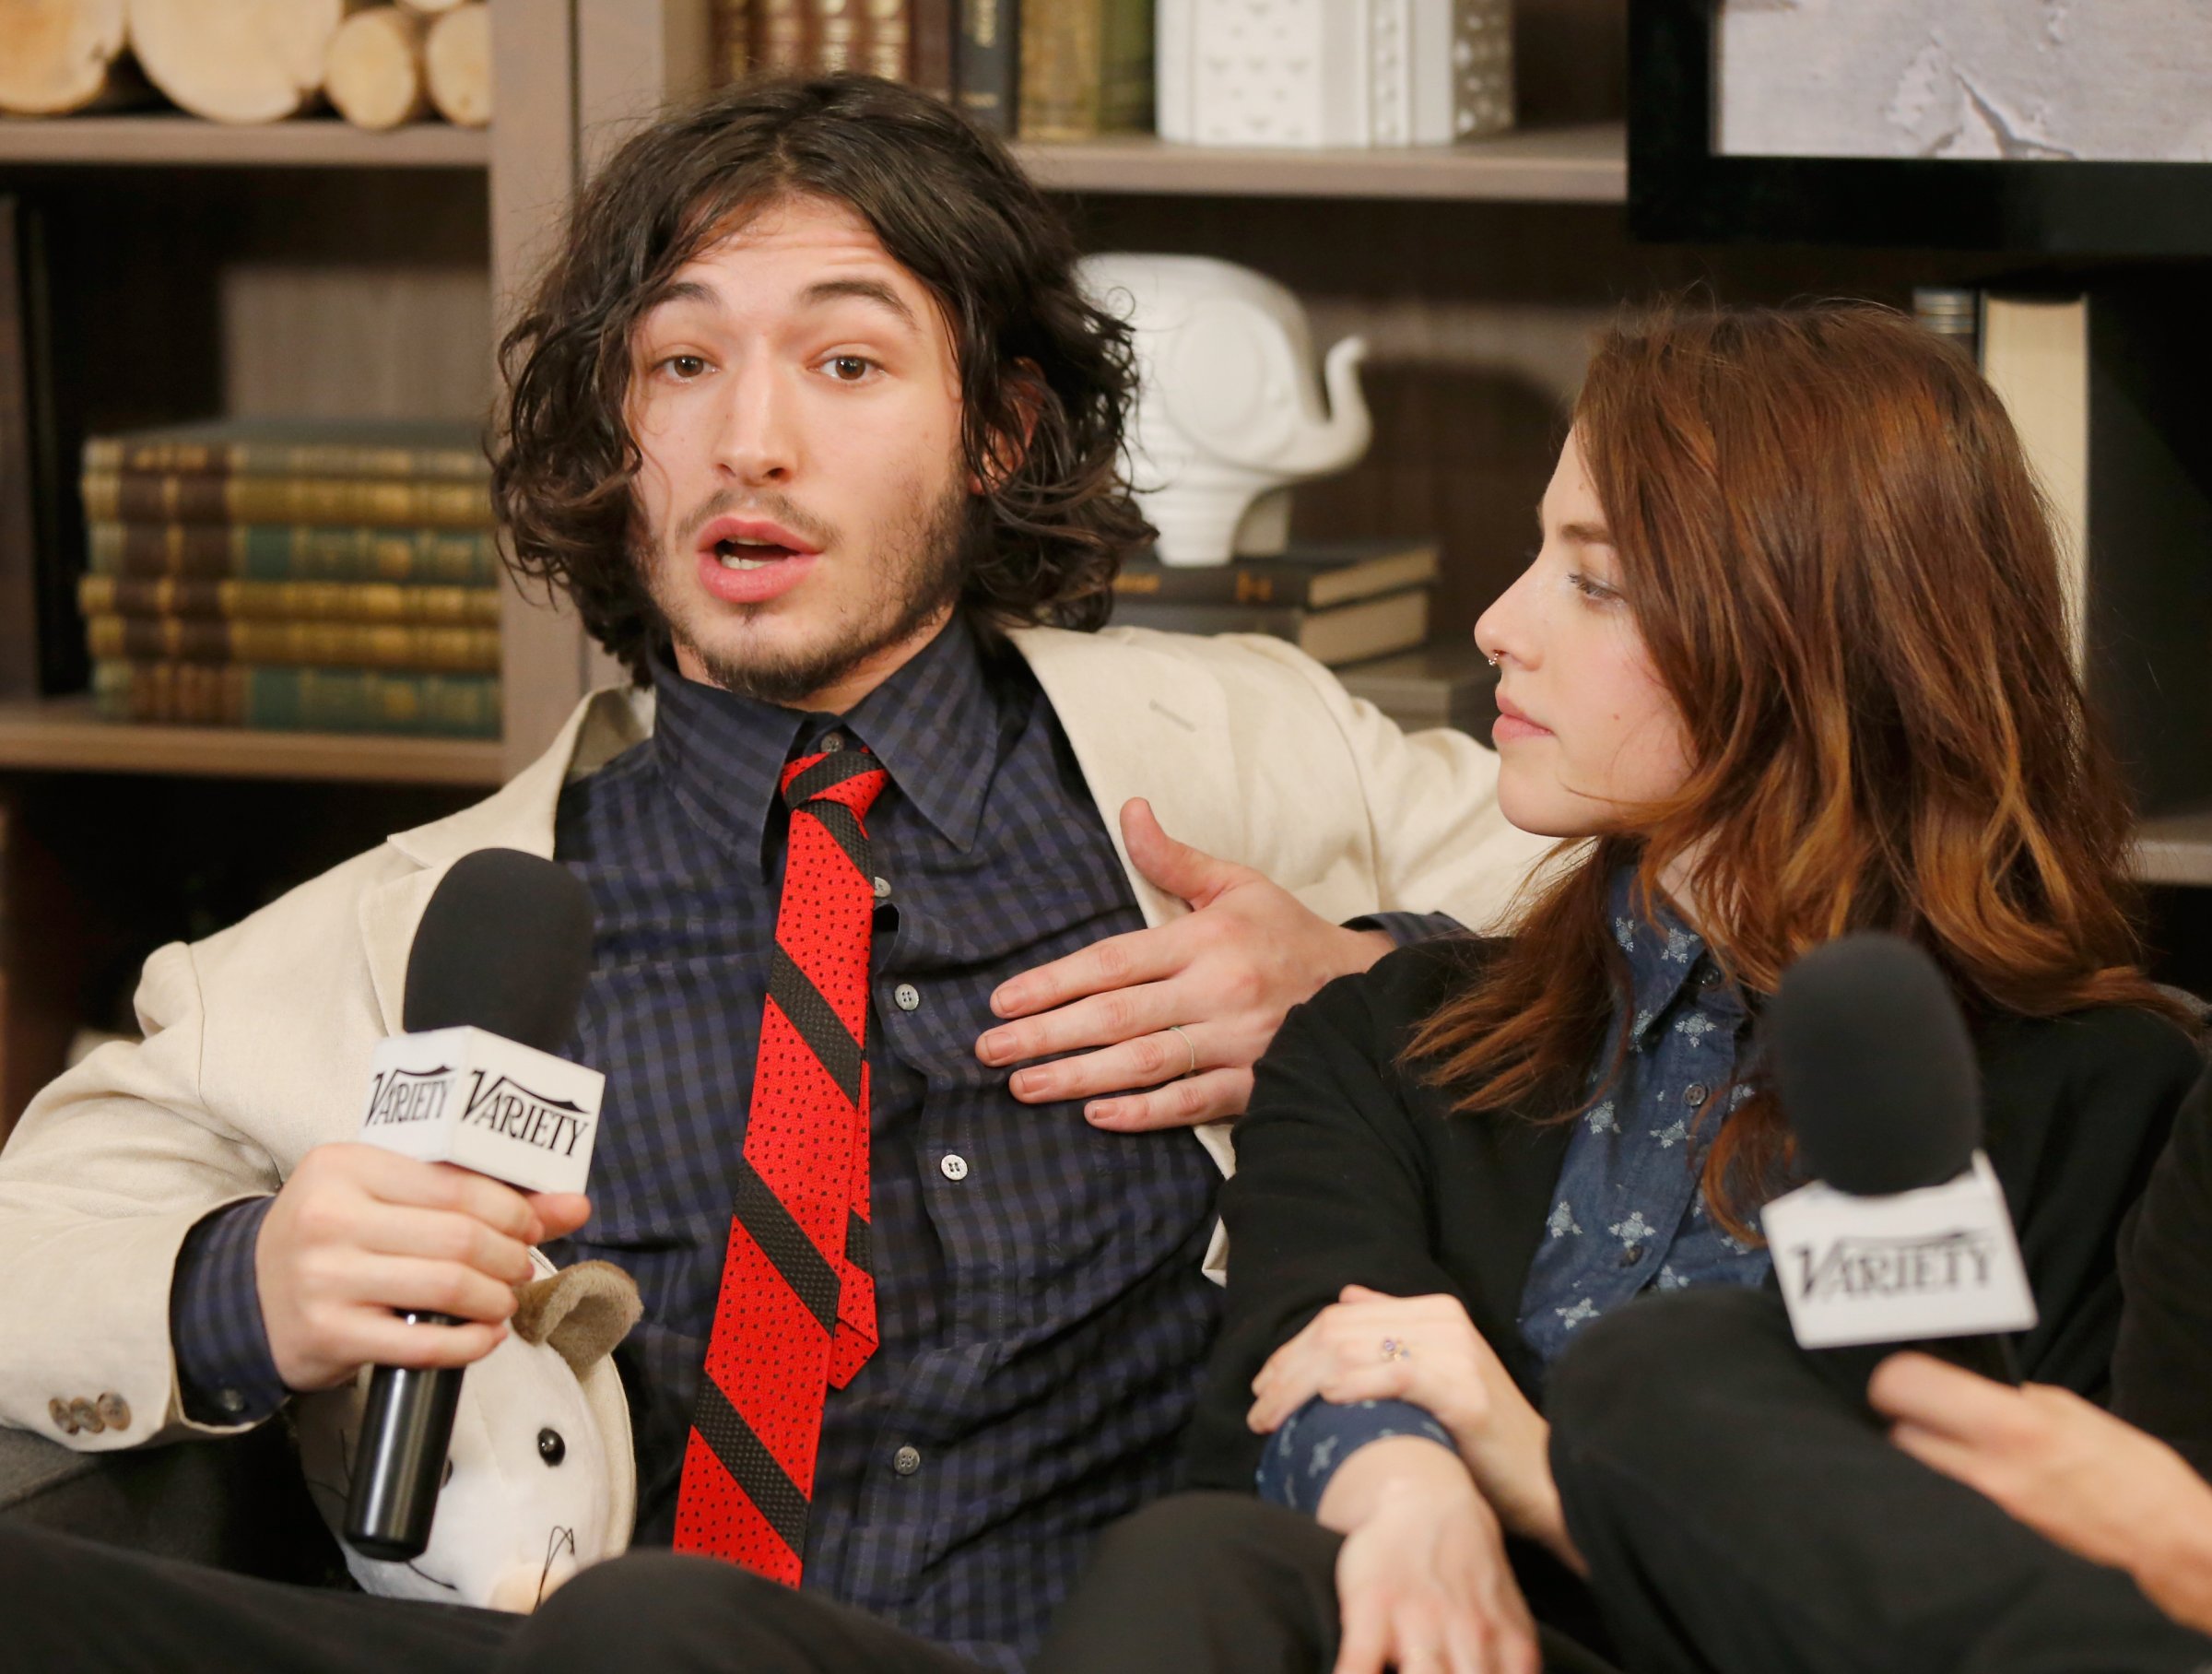 Ezra Miller and Olivia Thirlby at the Sundance Film Festival in 2015.